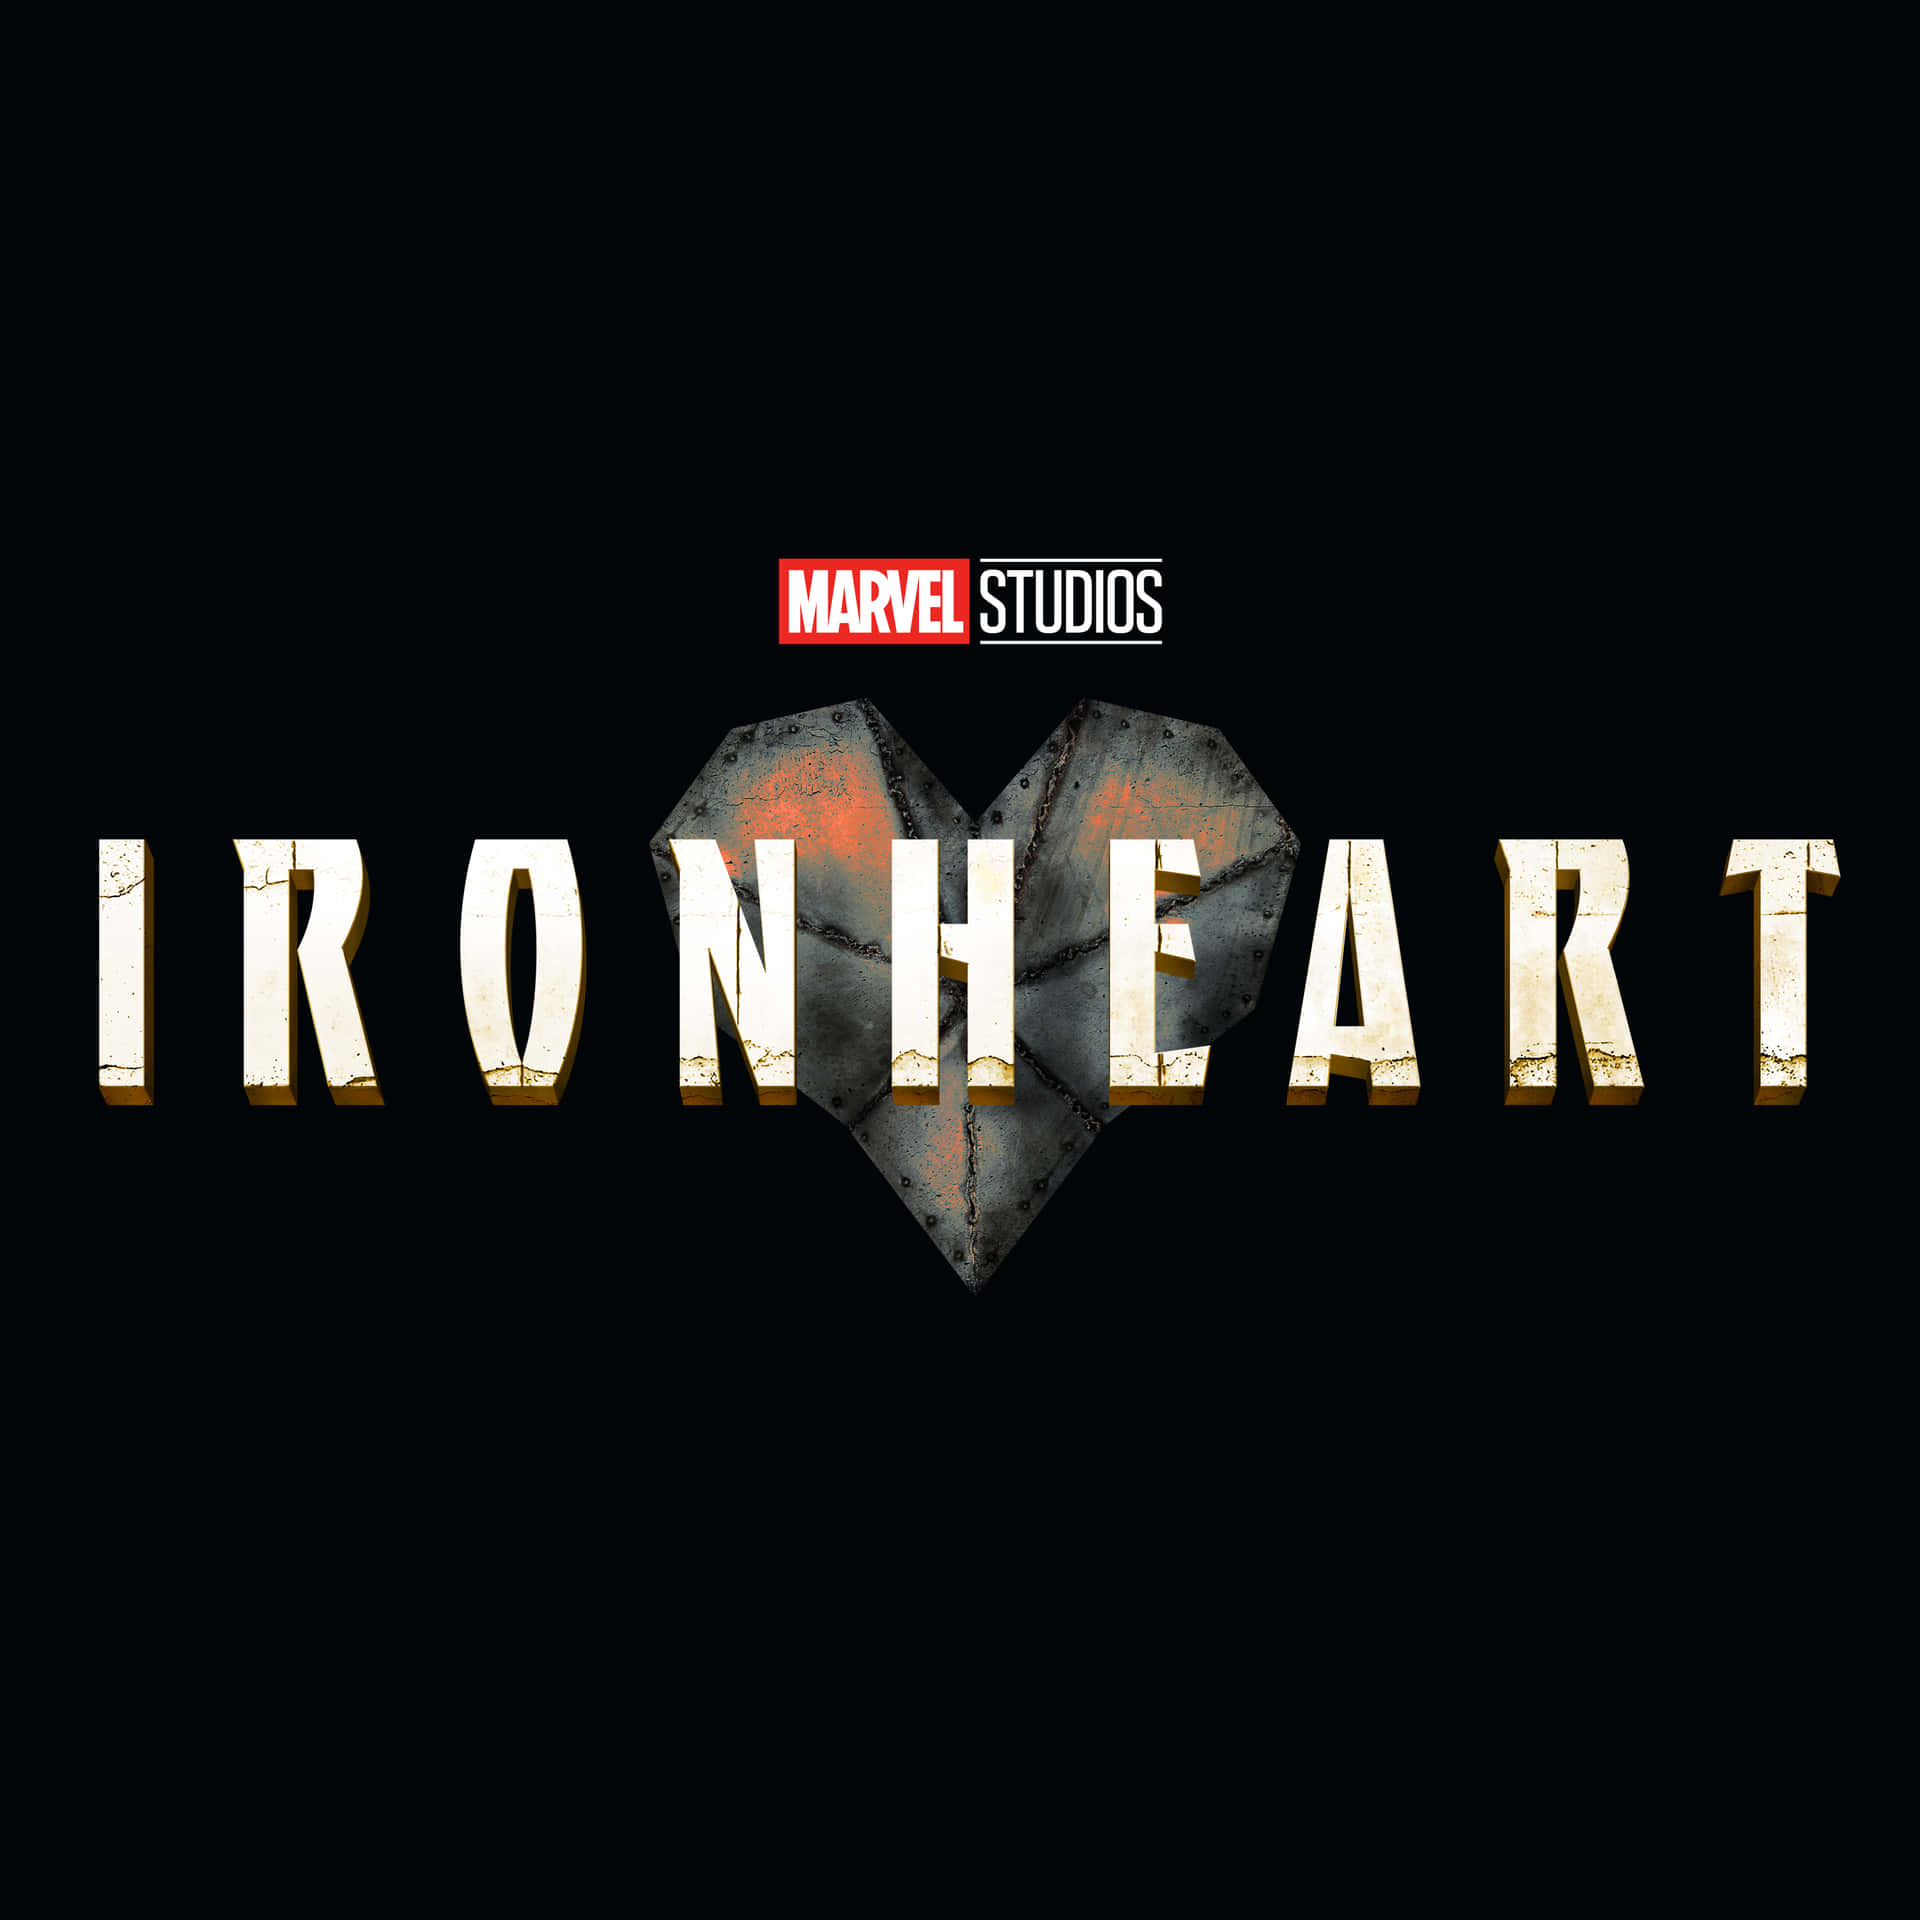 Show your strength with Ironheart! Wallpaper